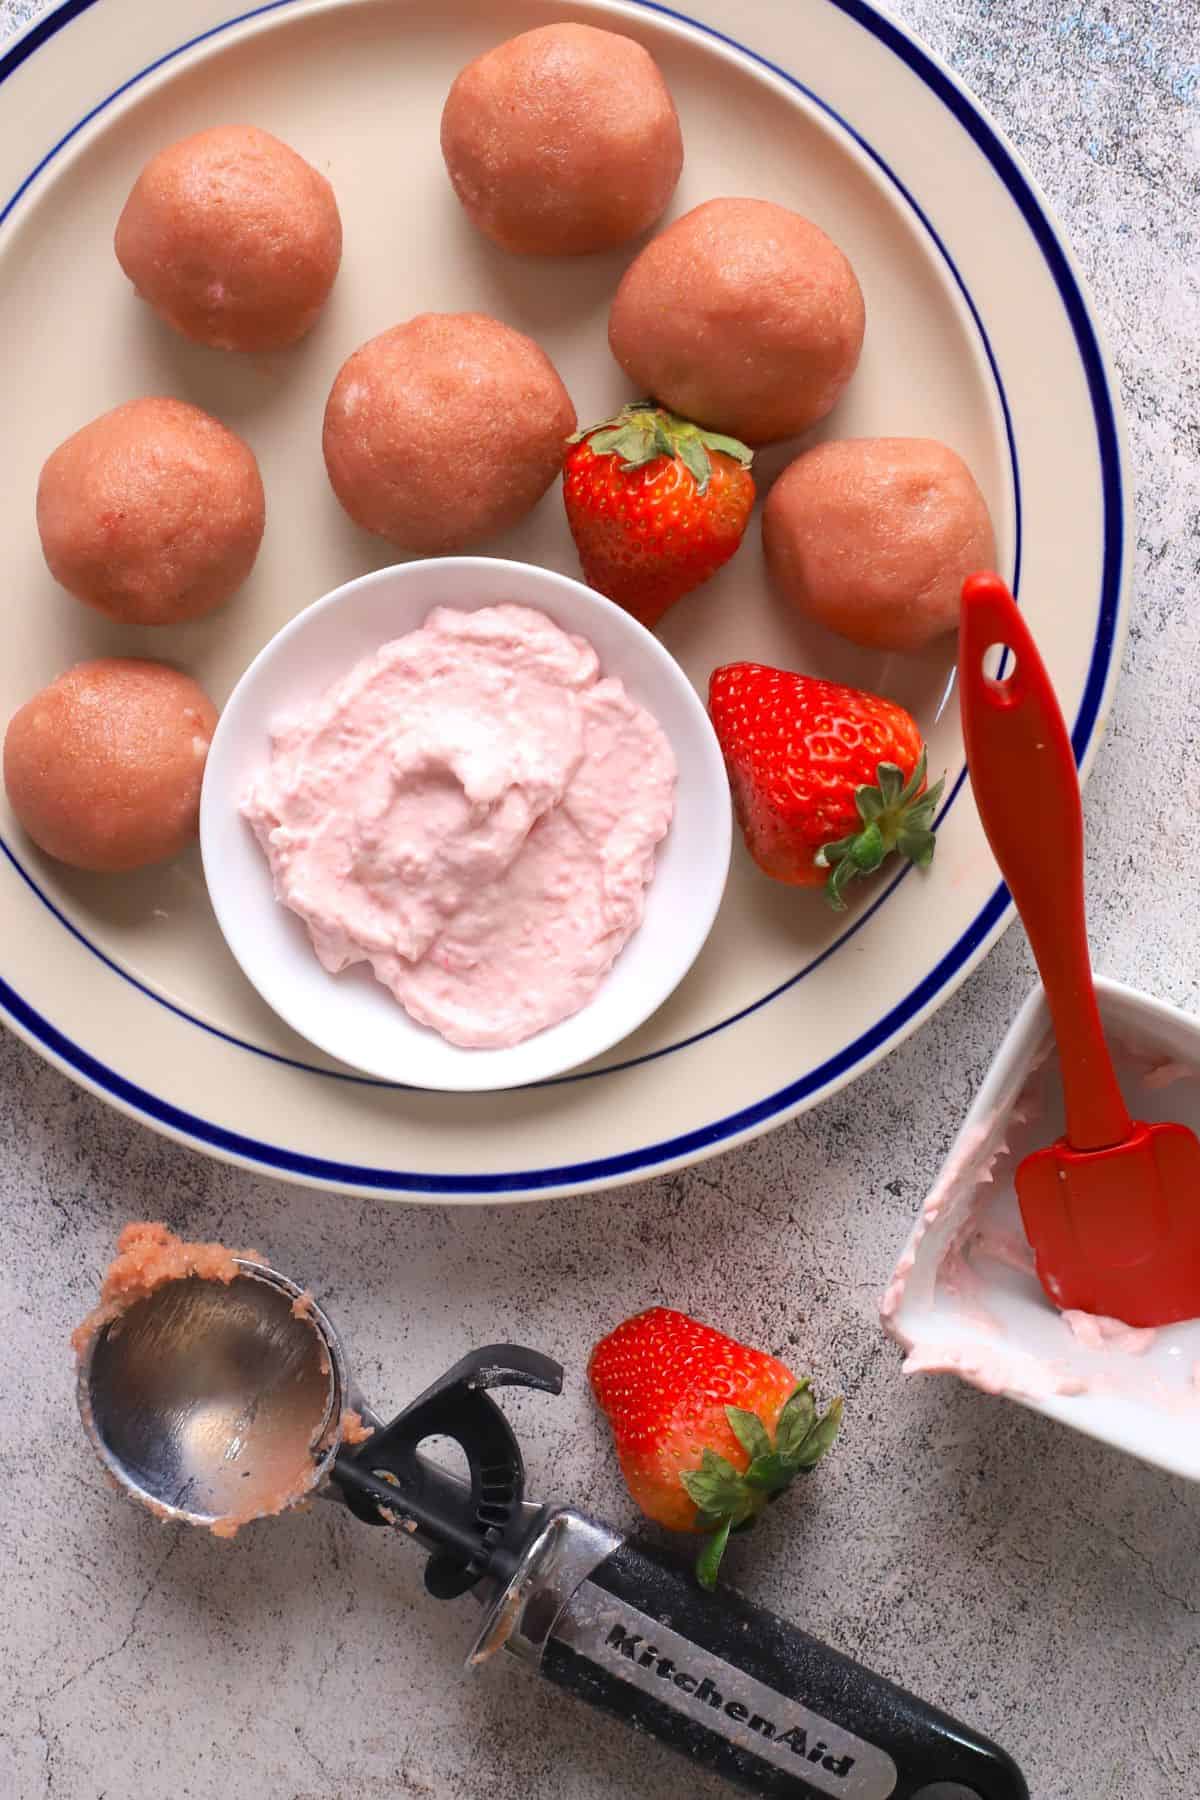 Strawberry protein bliss balls on a plate with a side of strawberry cream dip and fresh strawberries and an ice cream scoop.